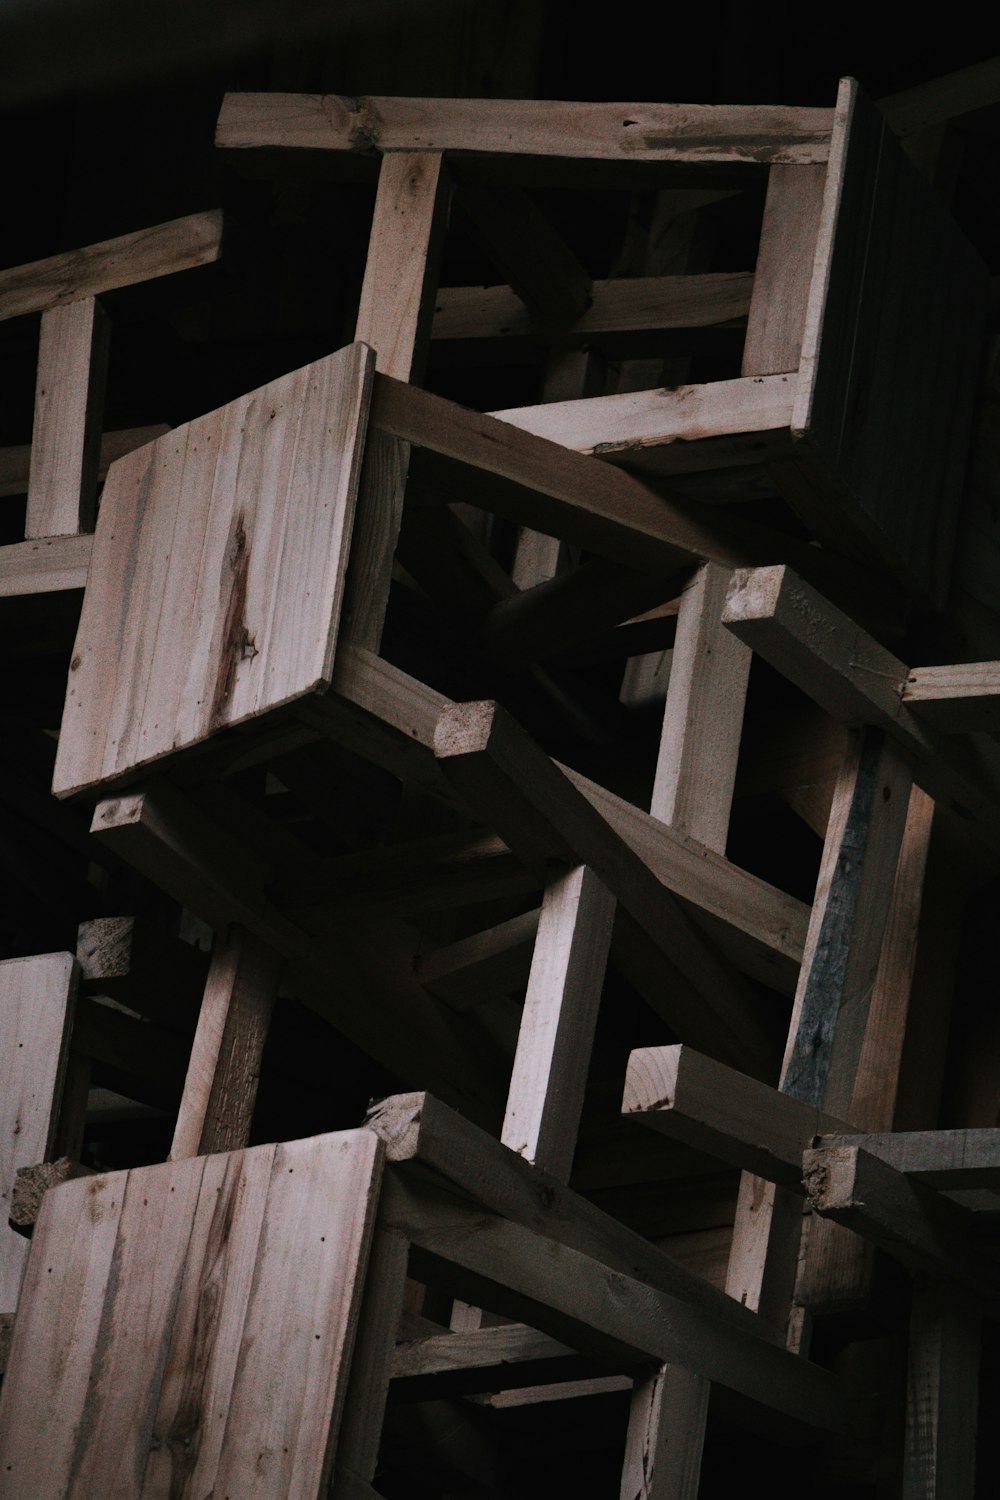 a pile of wooden crates stacked on top of each other